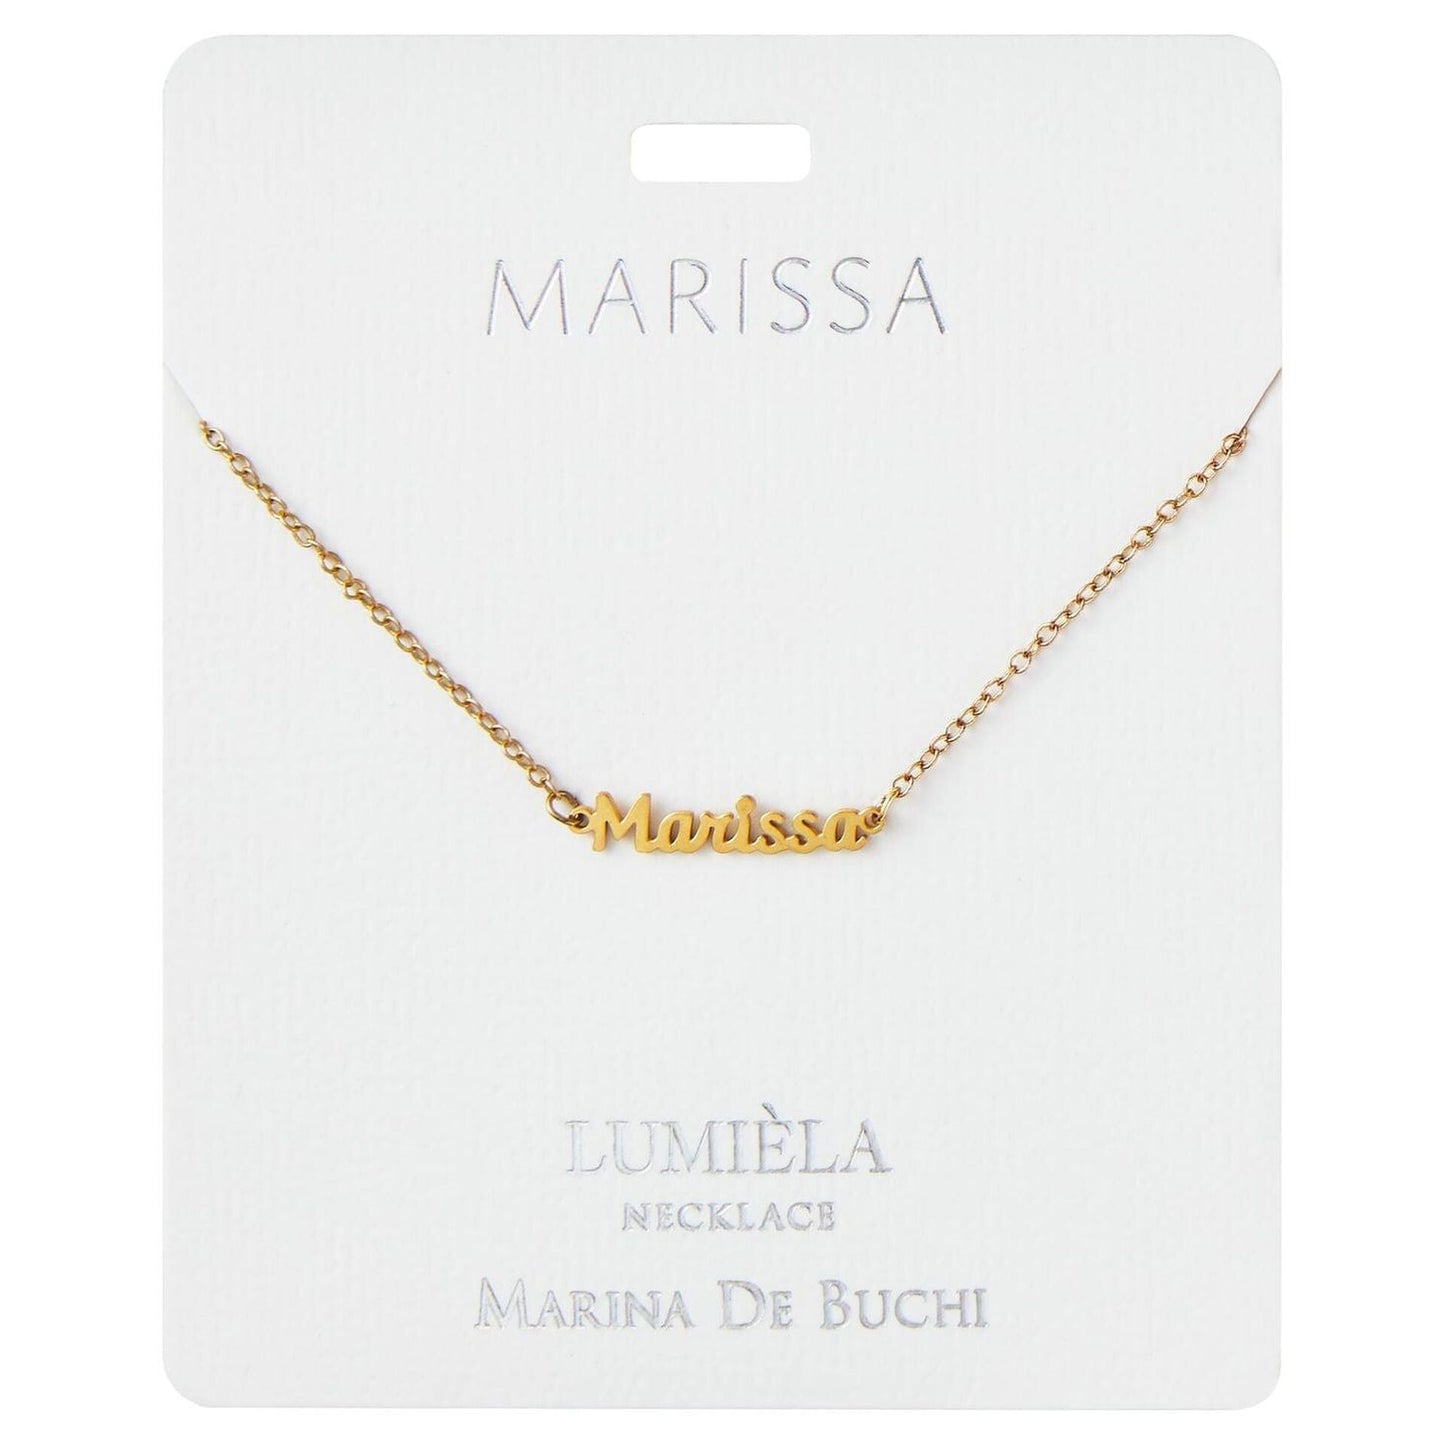 Lumiela Personalized Nameplate Madison Necklace in Gold Tone